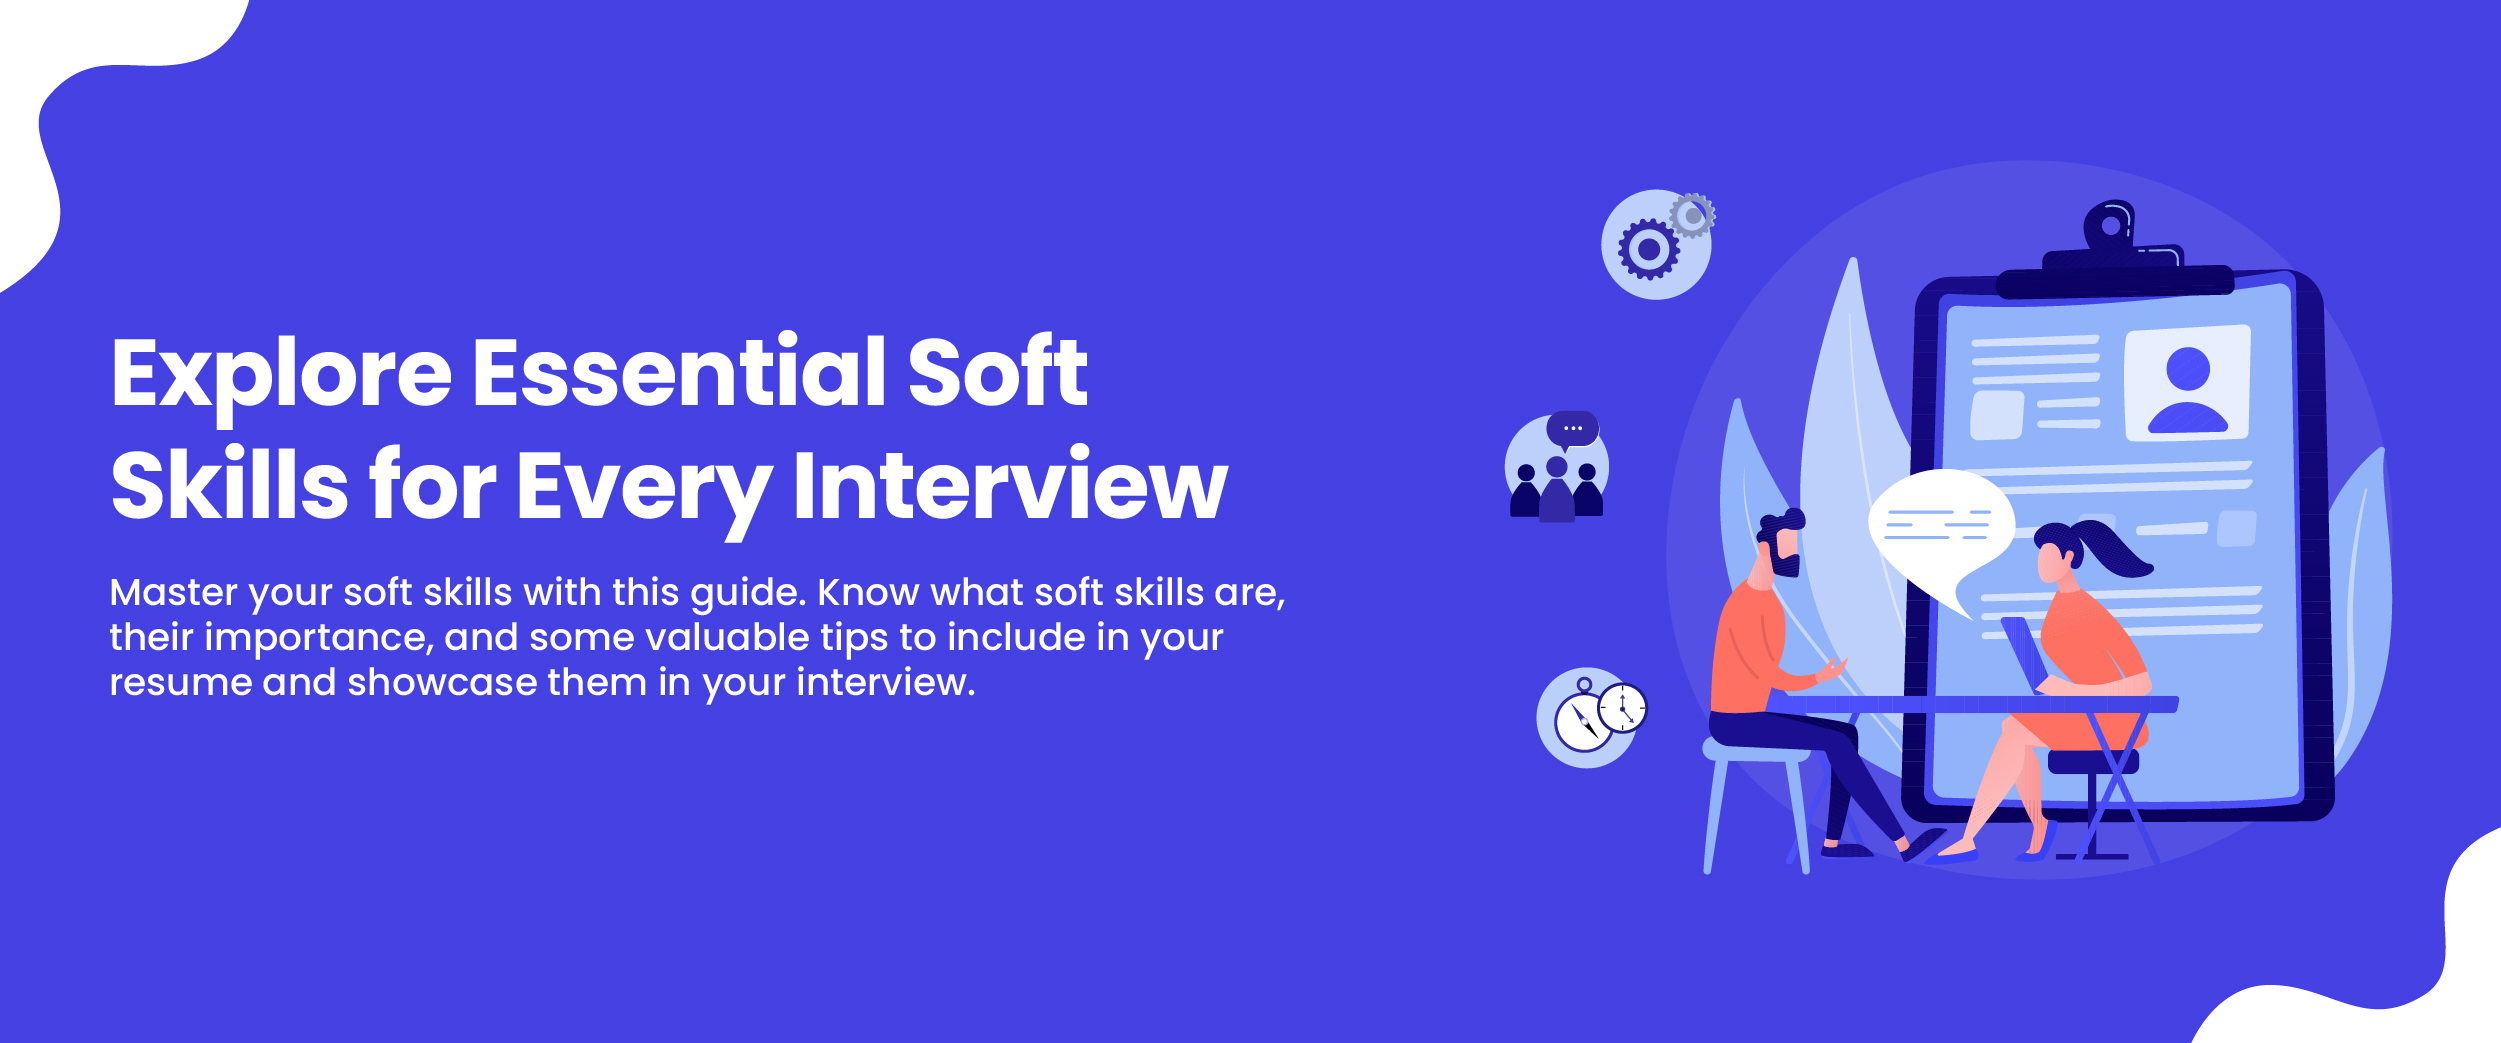 Explore Essential Soft Skills for Every Interview